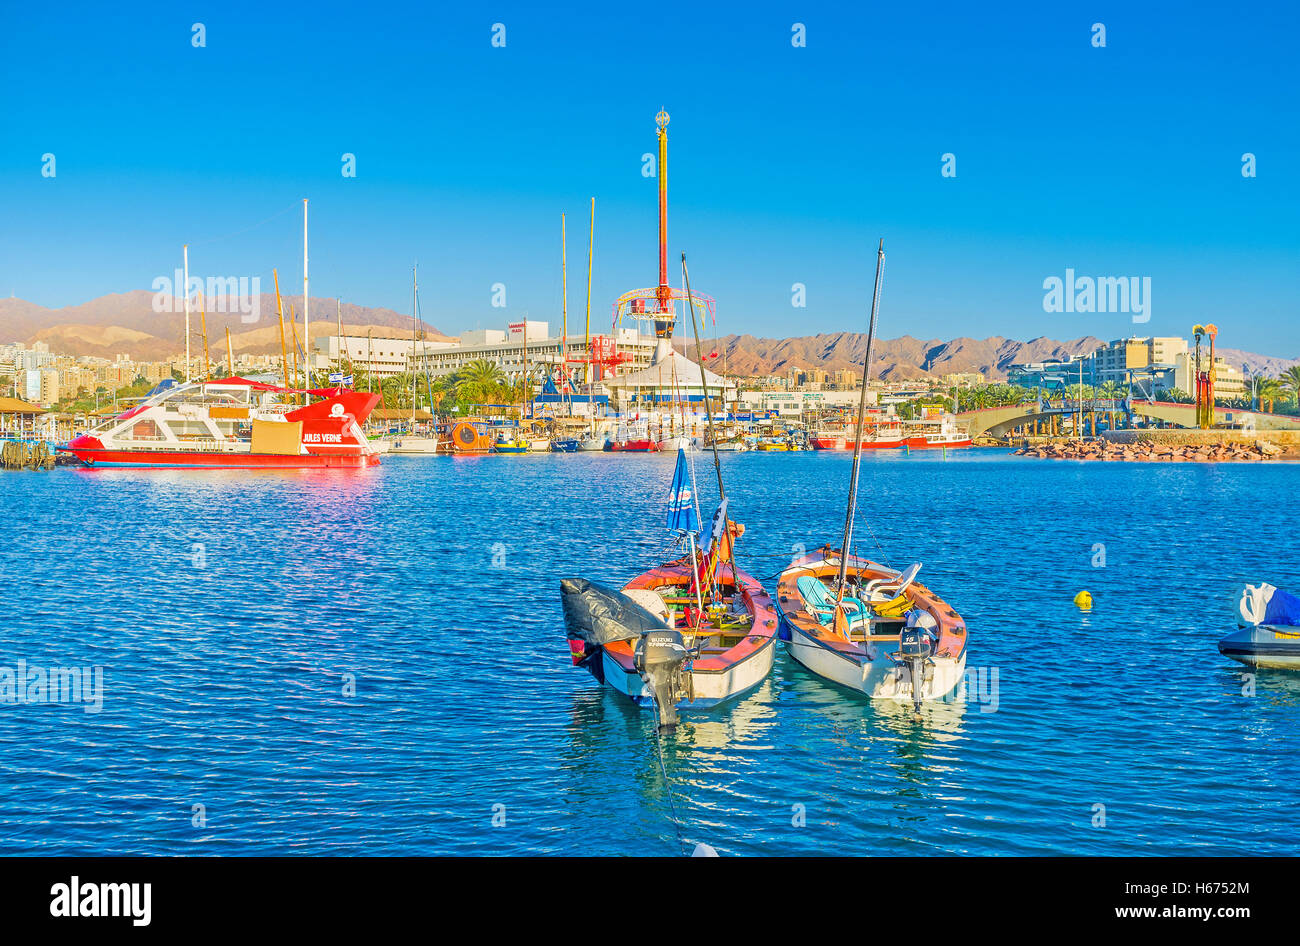 The city center with amusement park, harbor and the rocky mountains on the background, Eilat Stock Photo